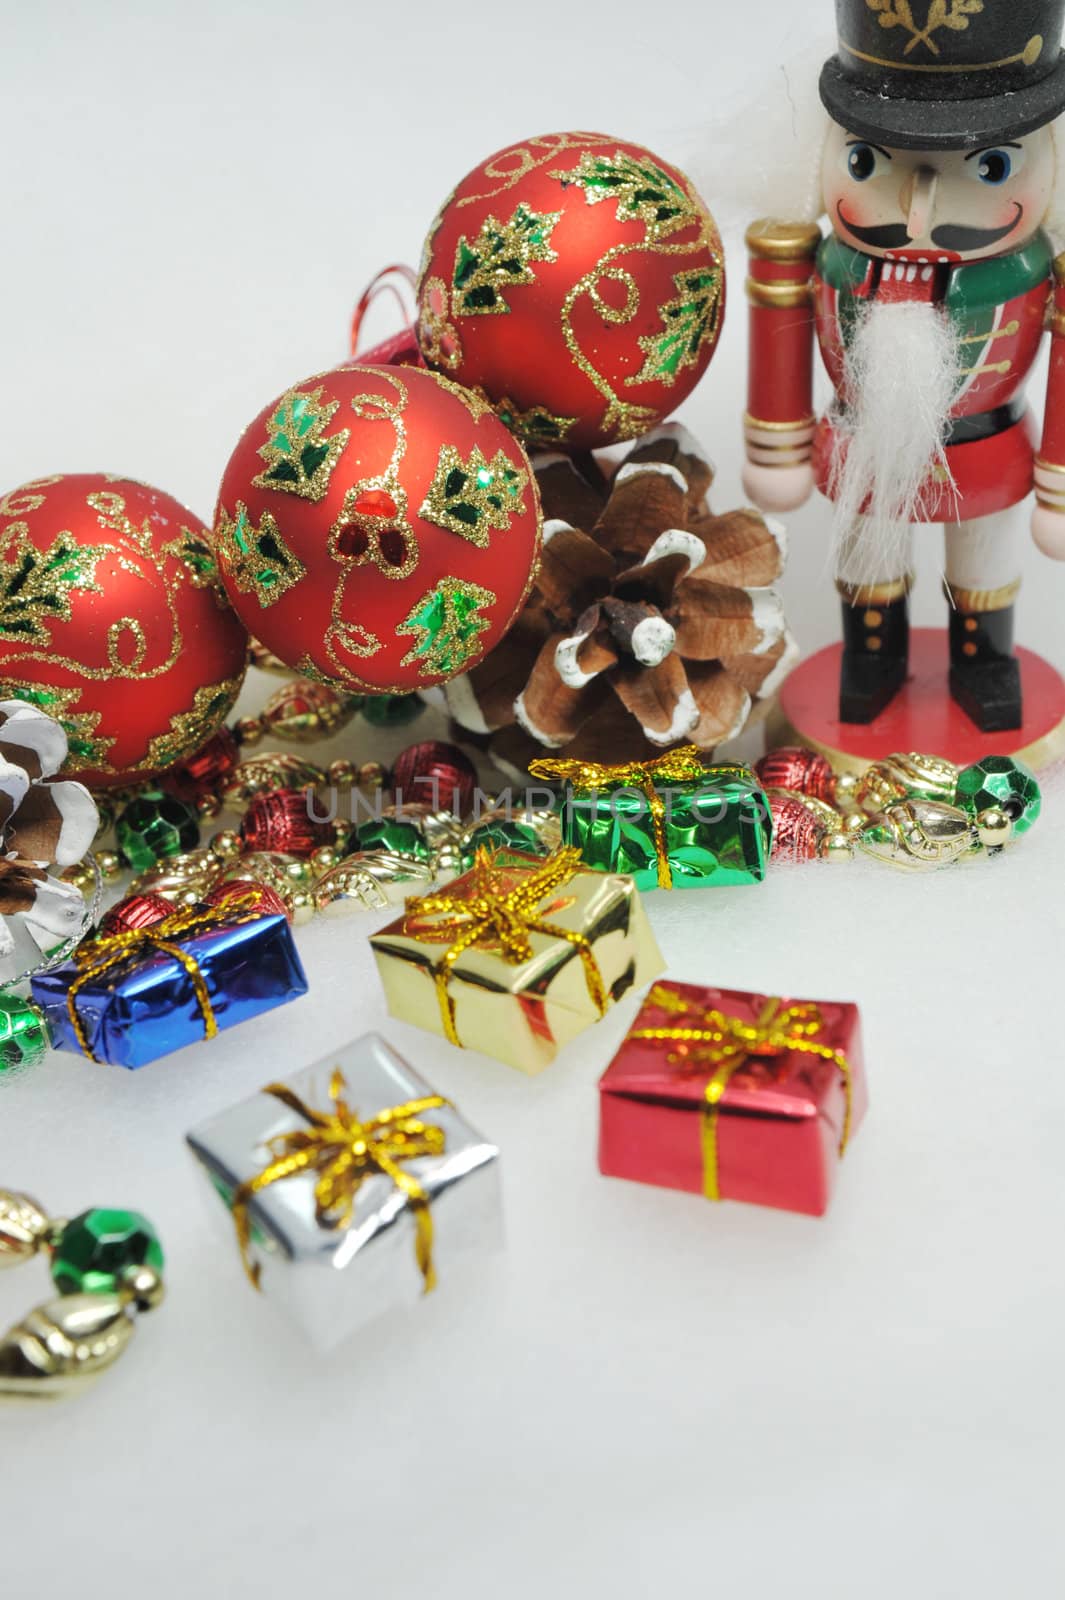 Assorted Christmas ornaments on a light background.